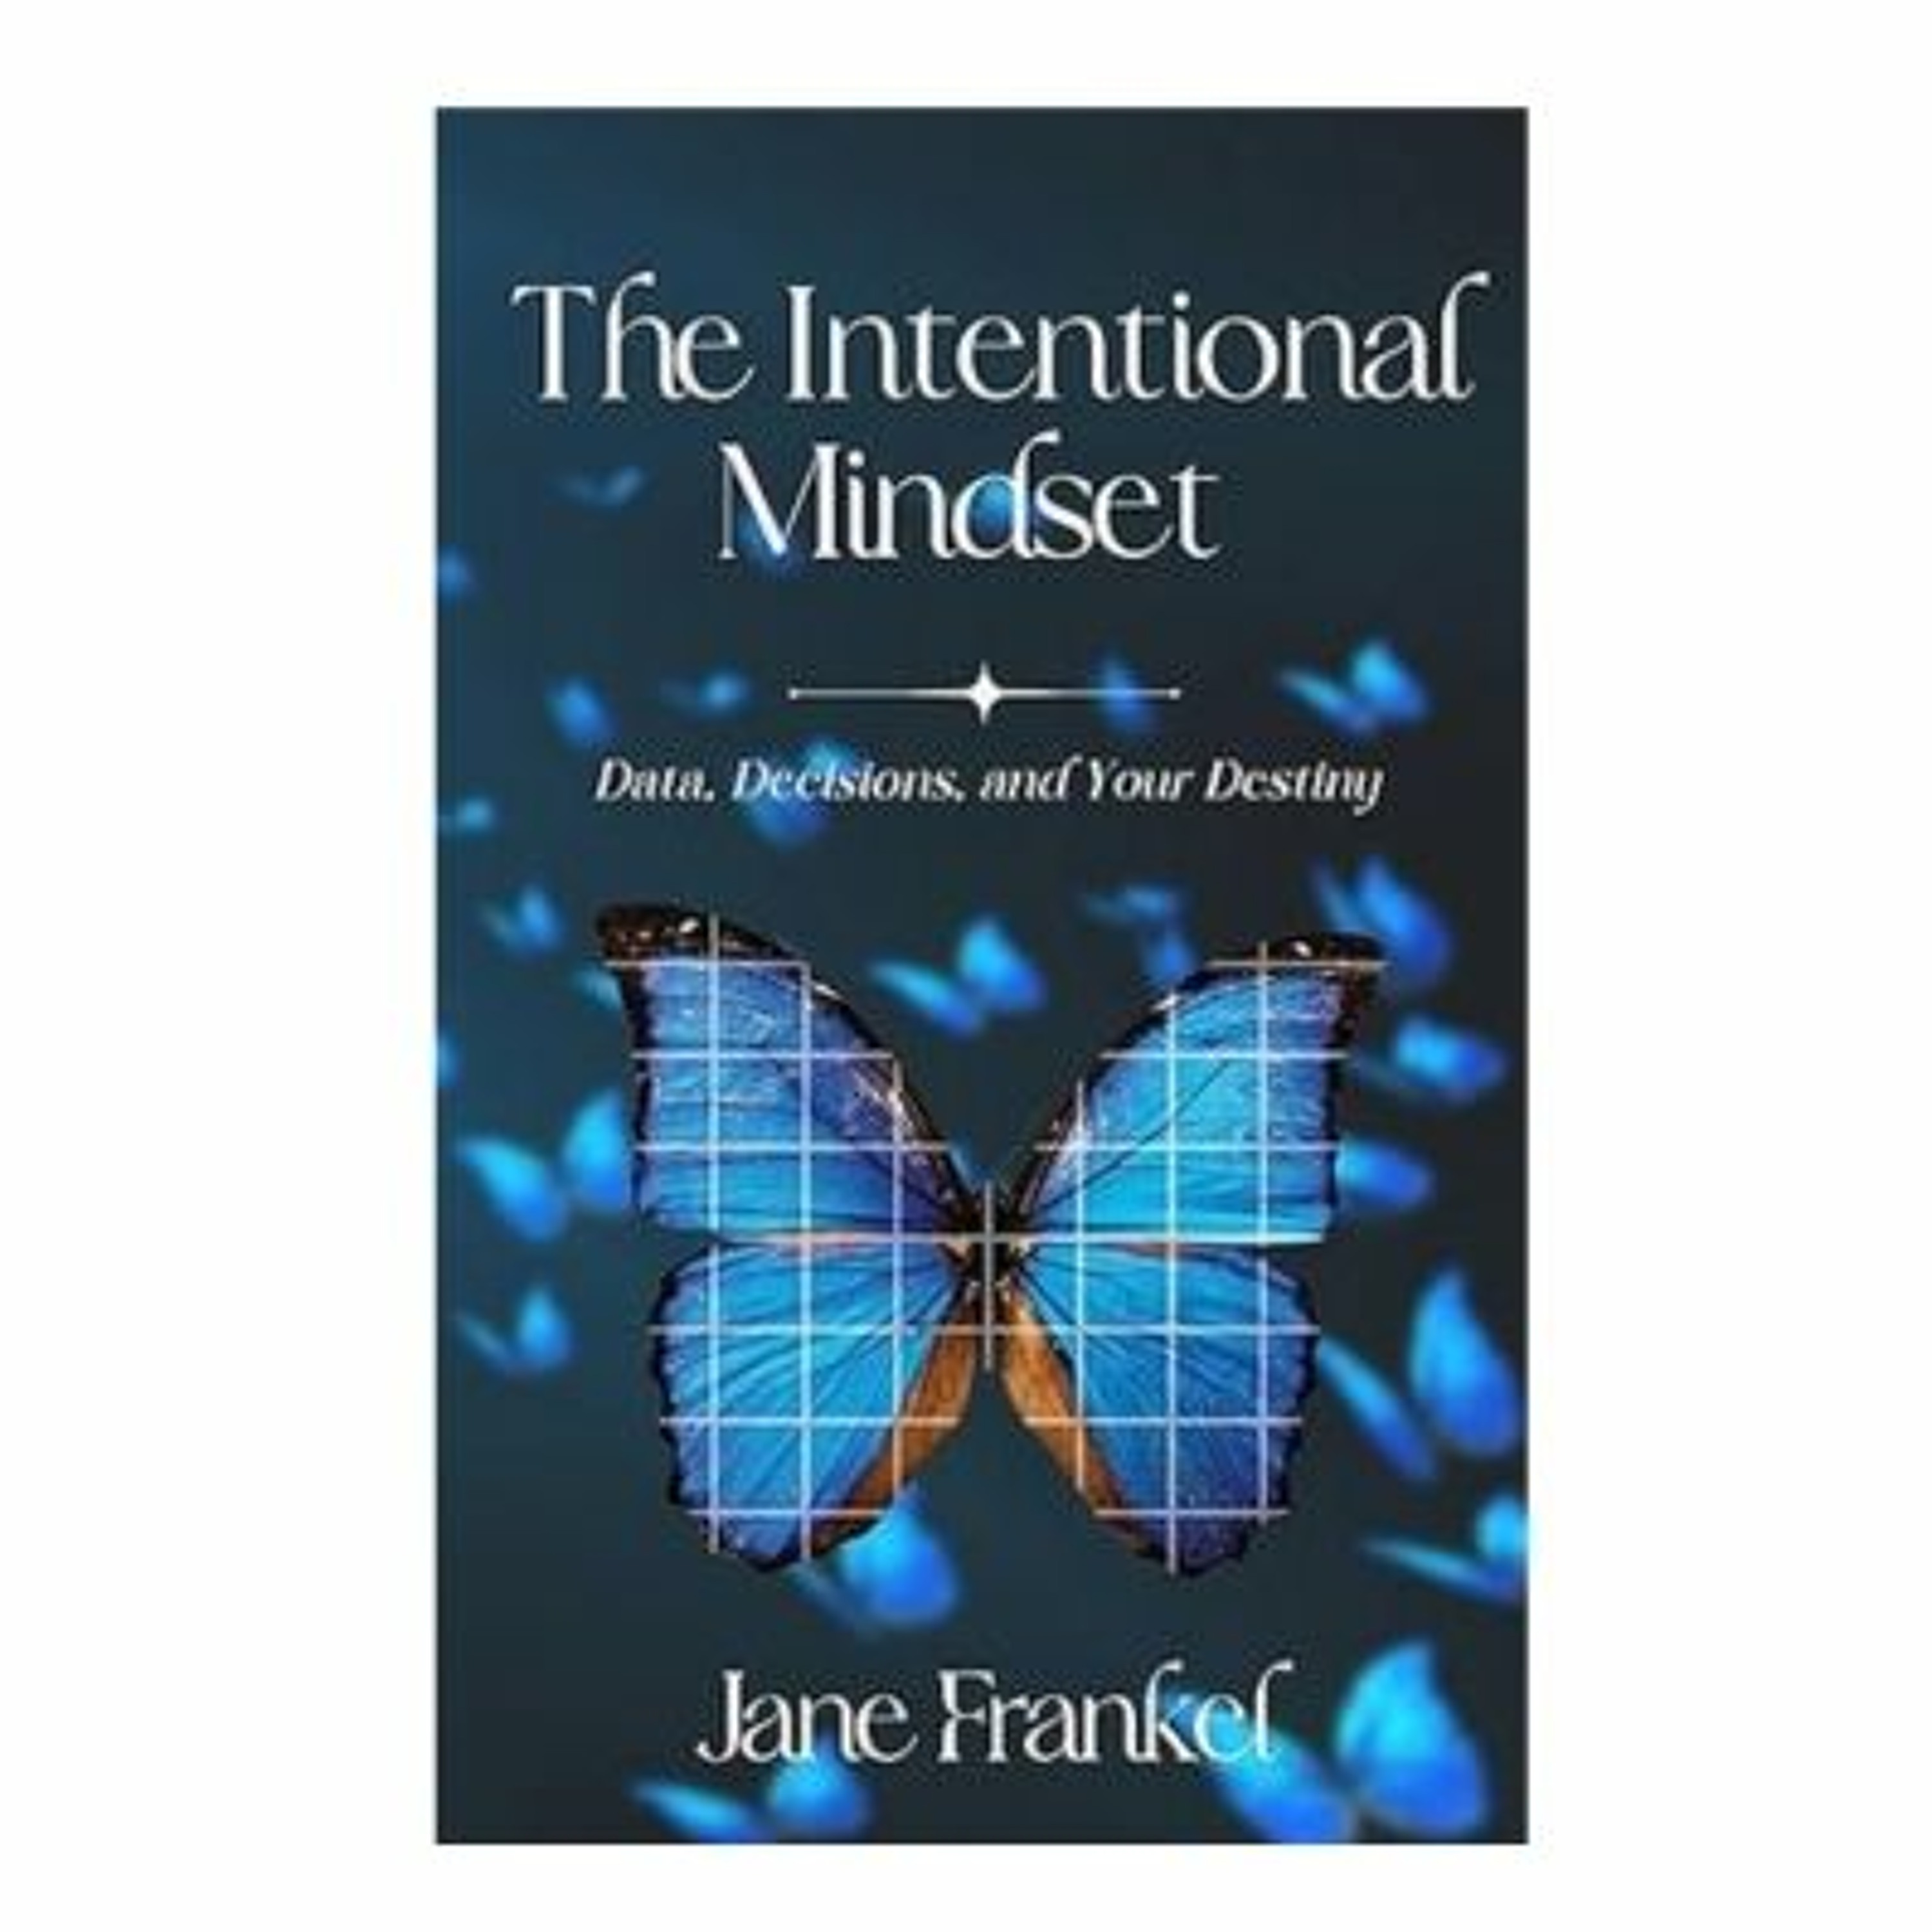 Podcast 1076: The Intentional Mindset with Jane Frankel